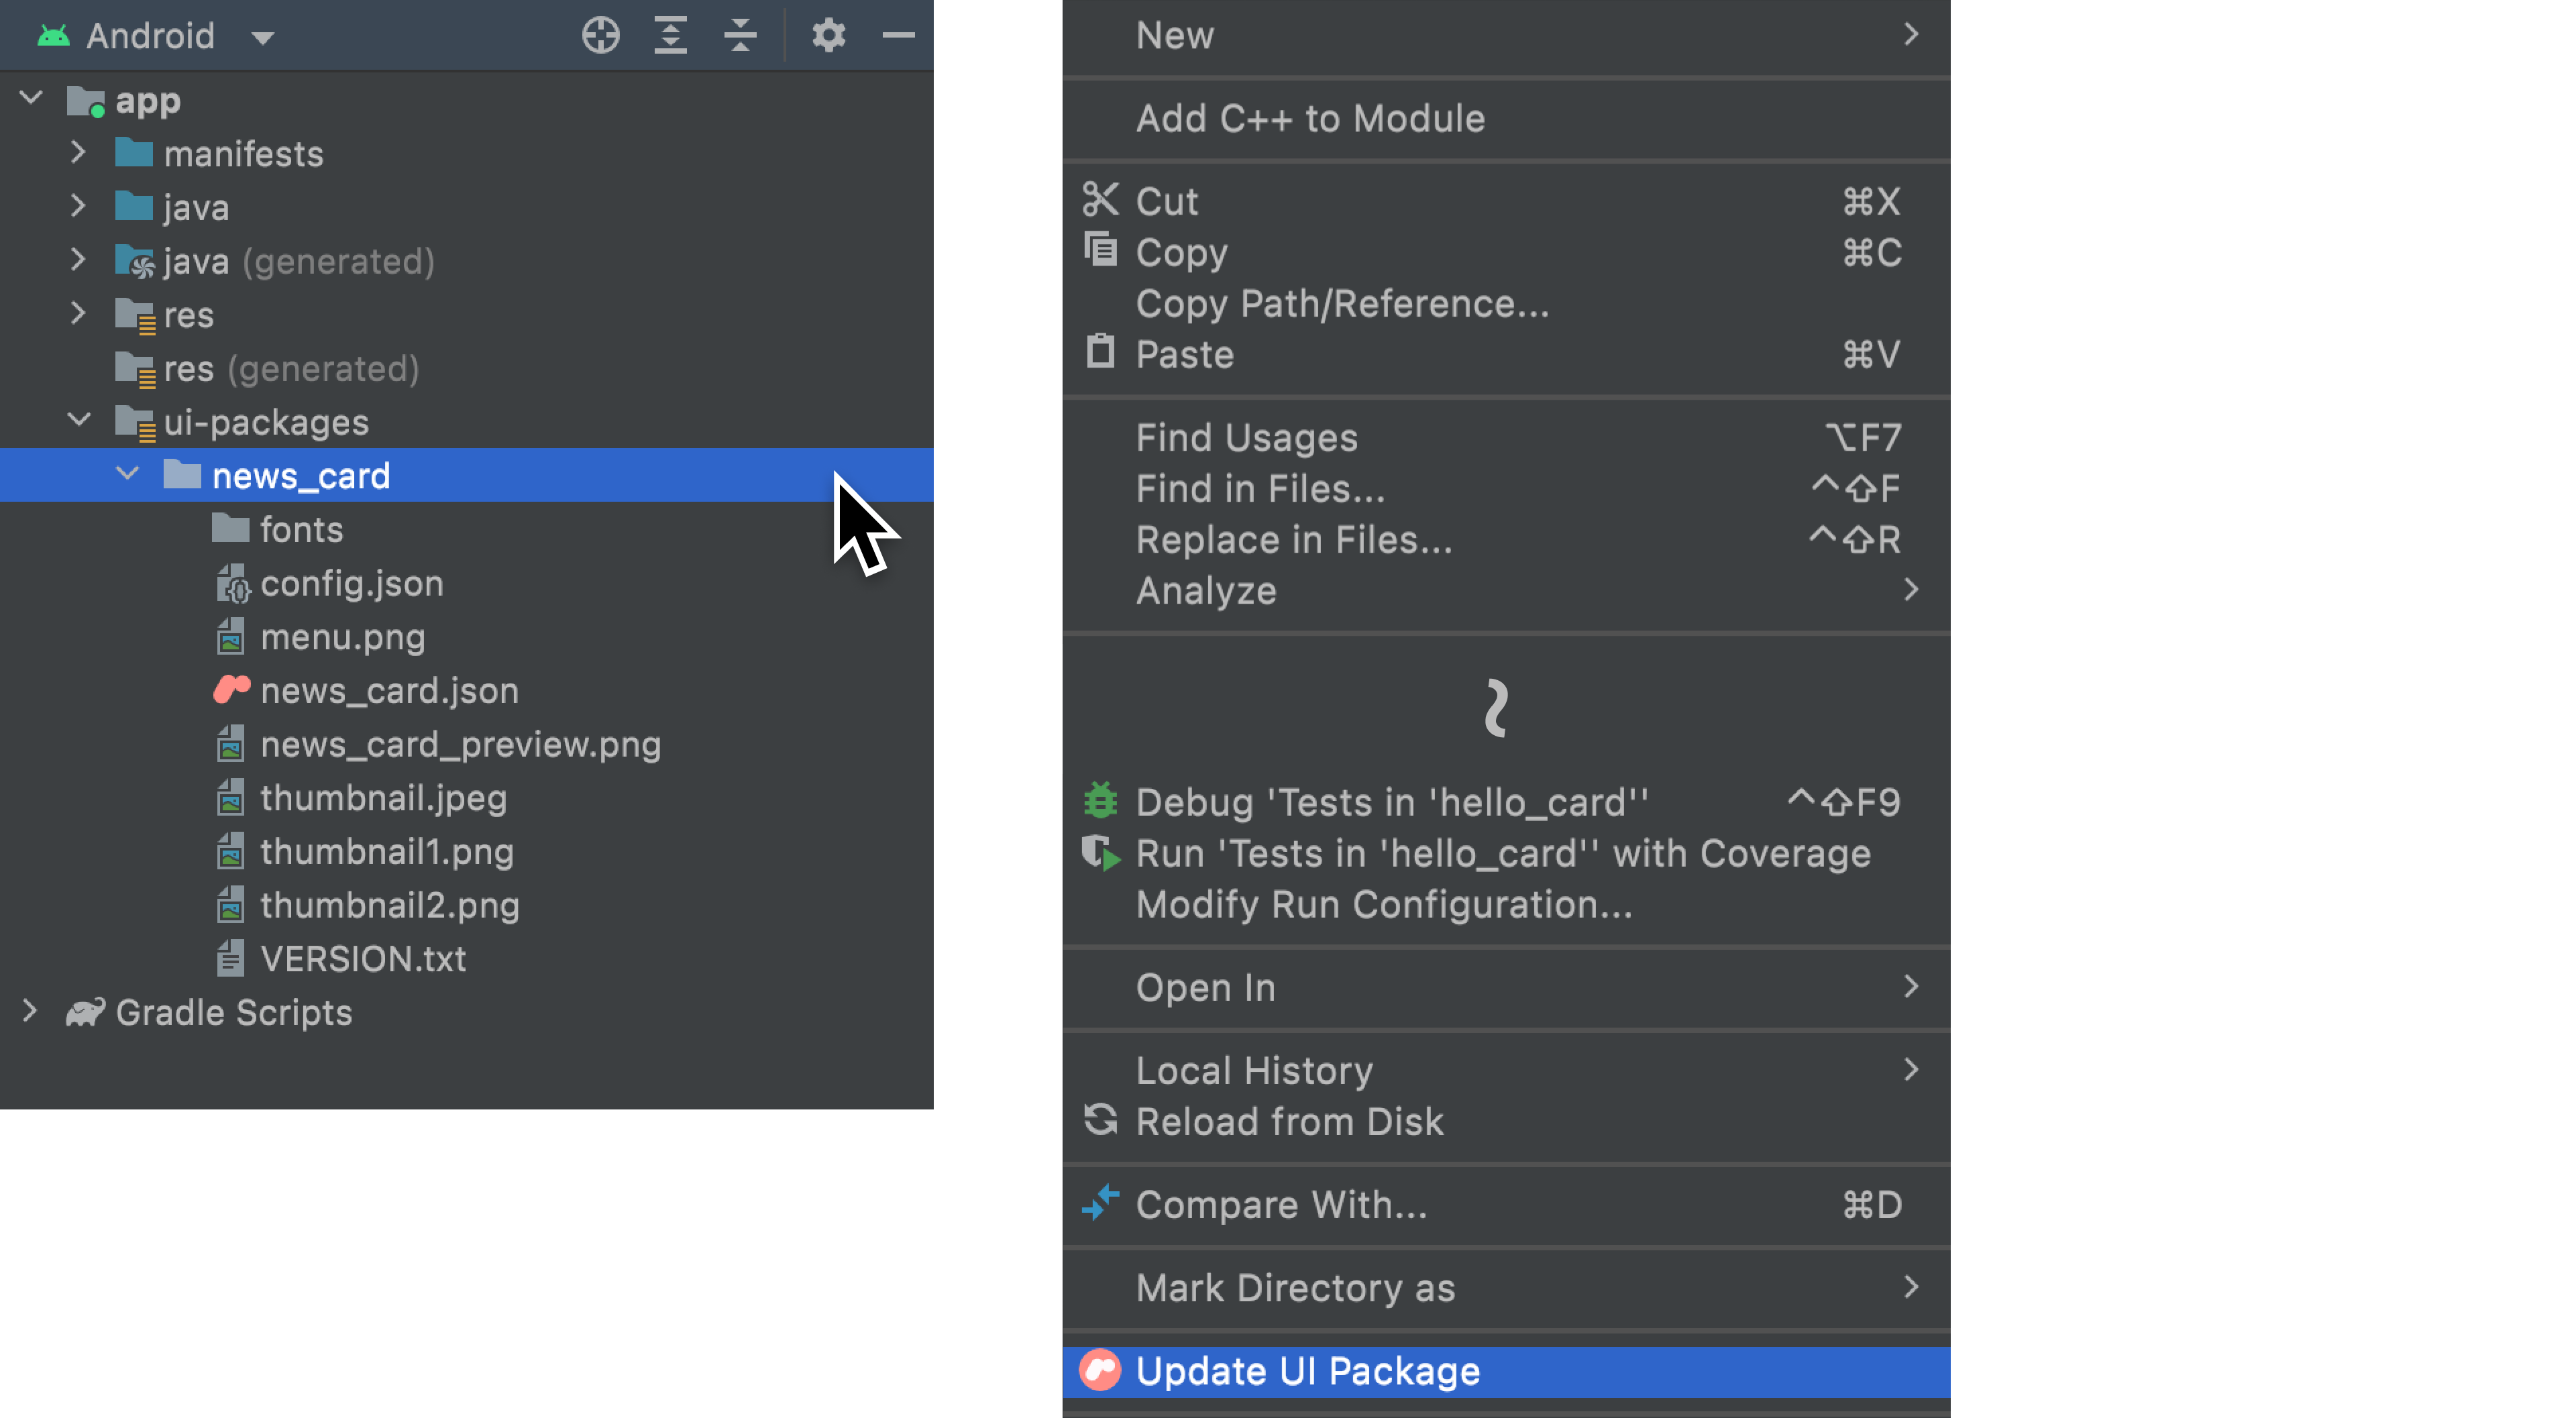 Update UI Package option in the context menu